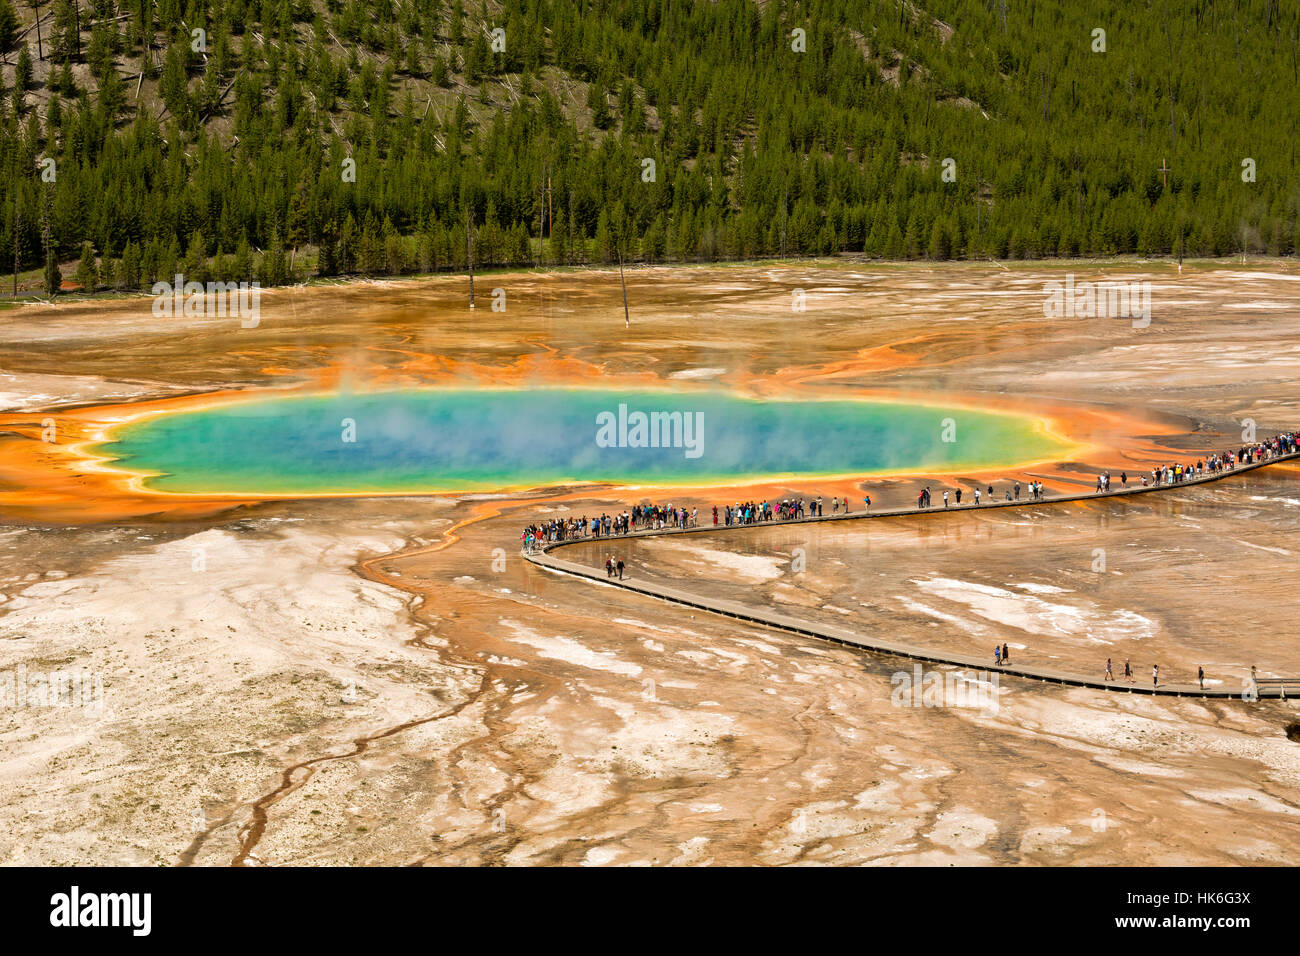 WY02210-00...WYOMING - Grand Prismatic Spring Midway Geyser Basin dans le Parc National de Yellowstone. Banque D'Images